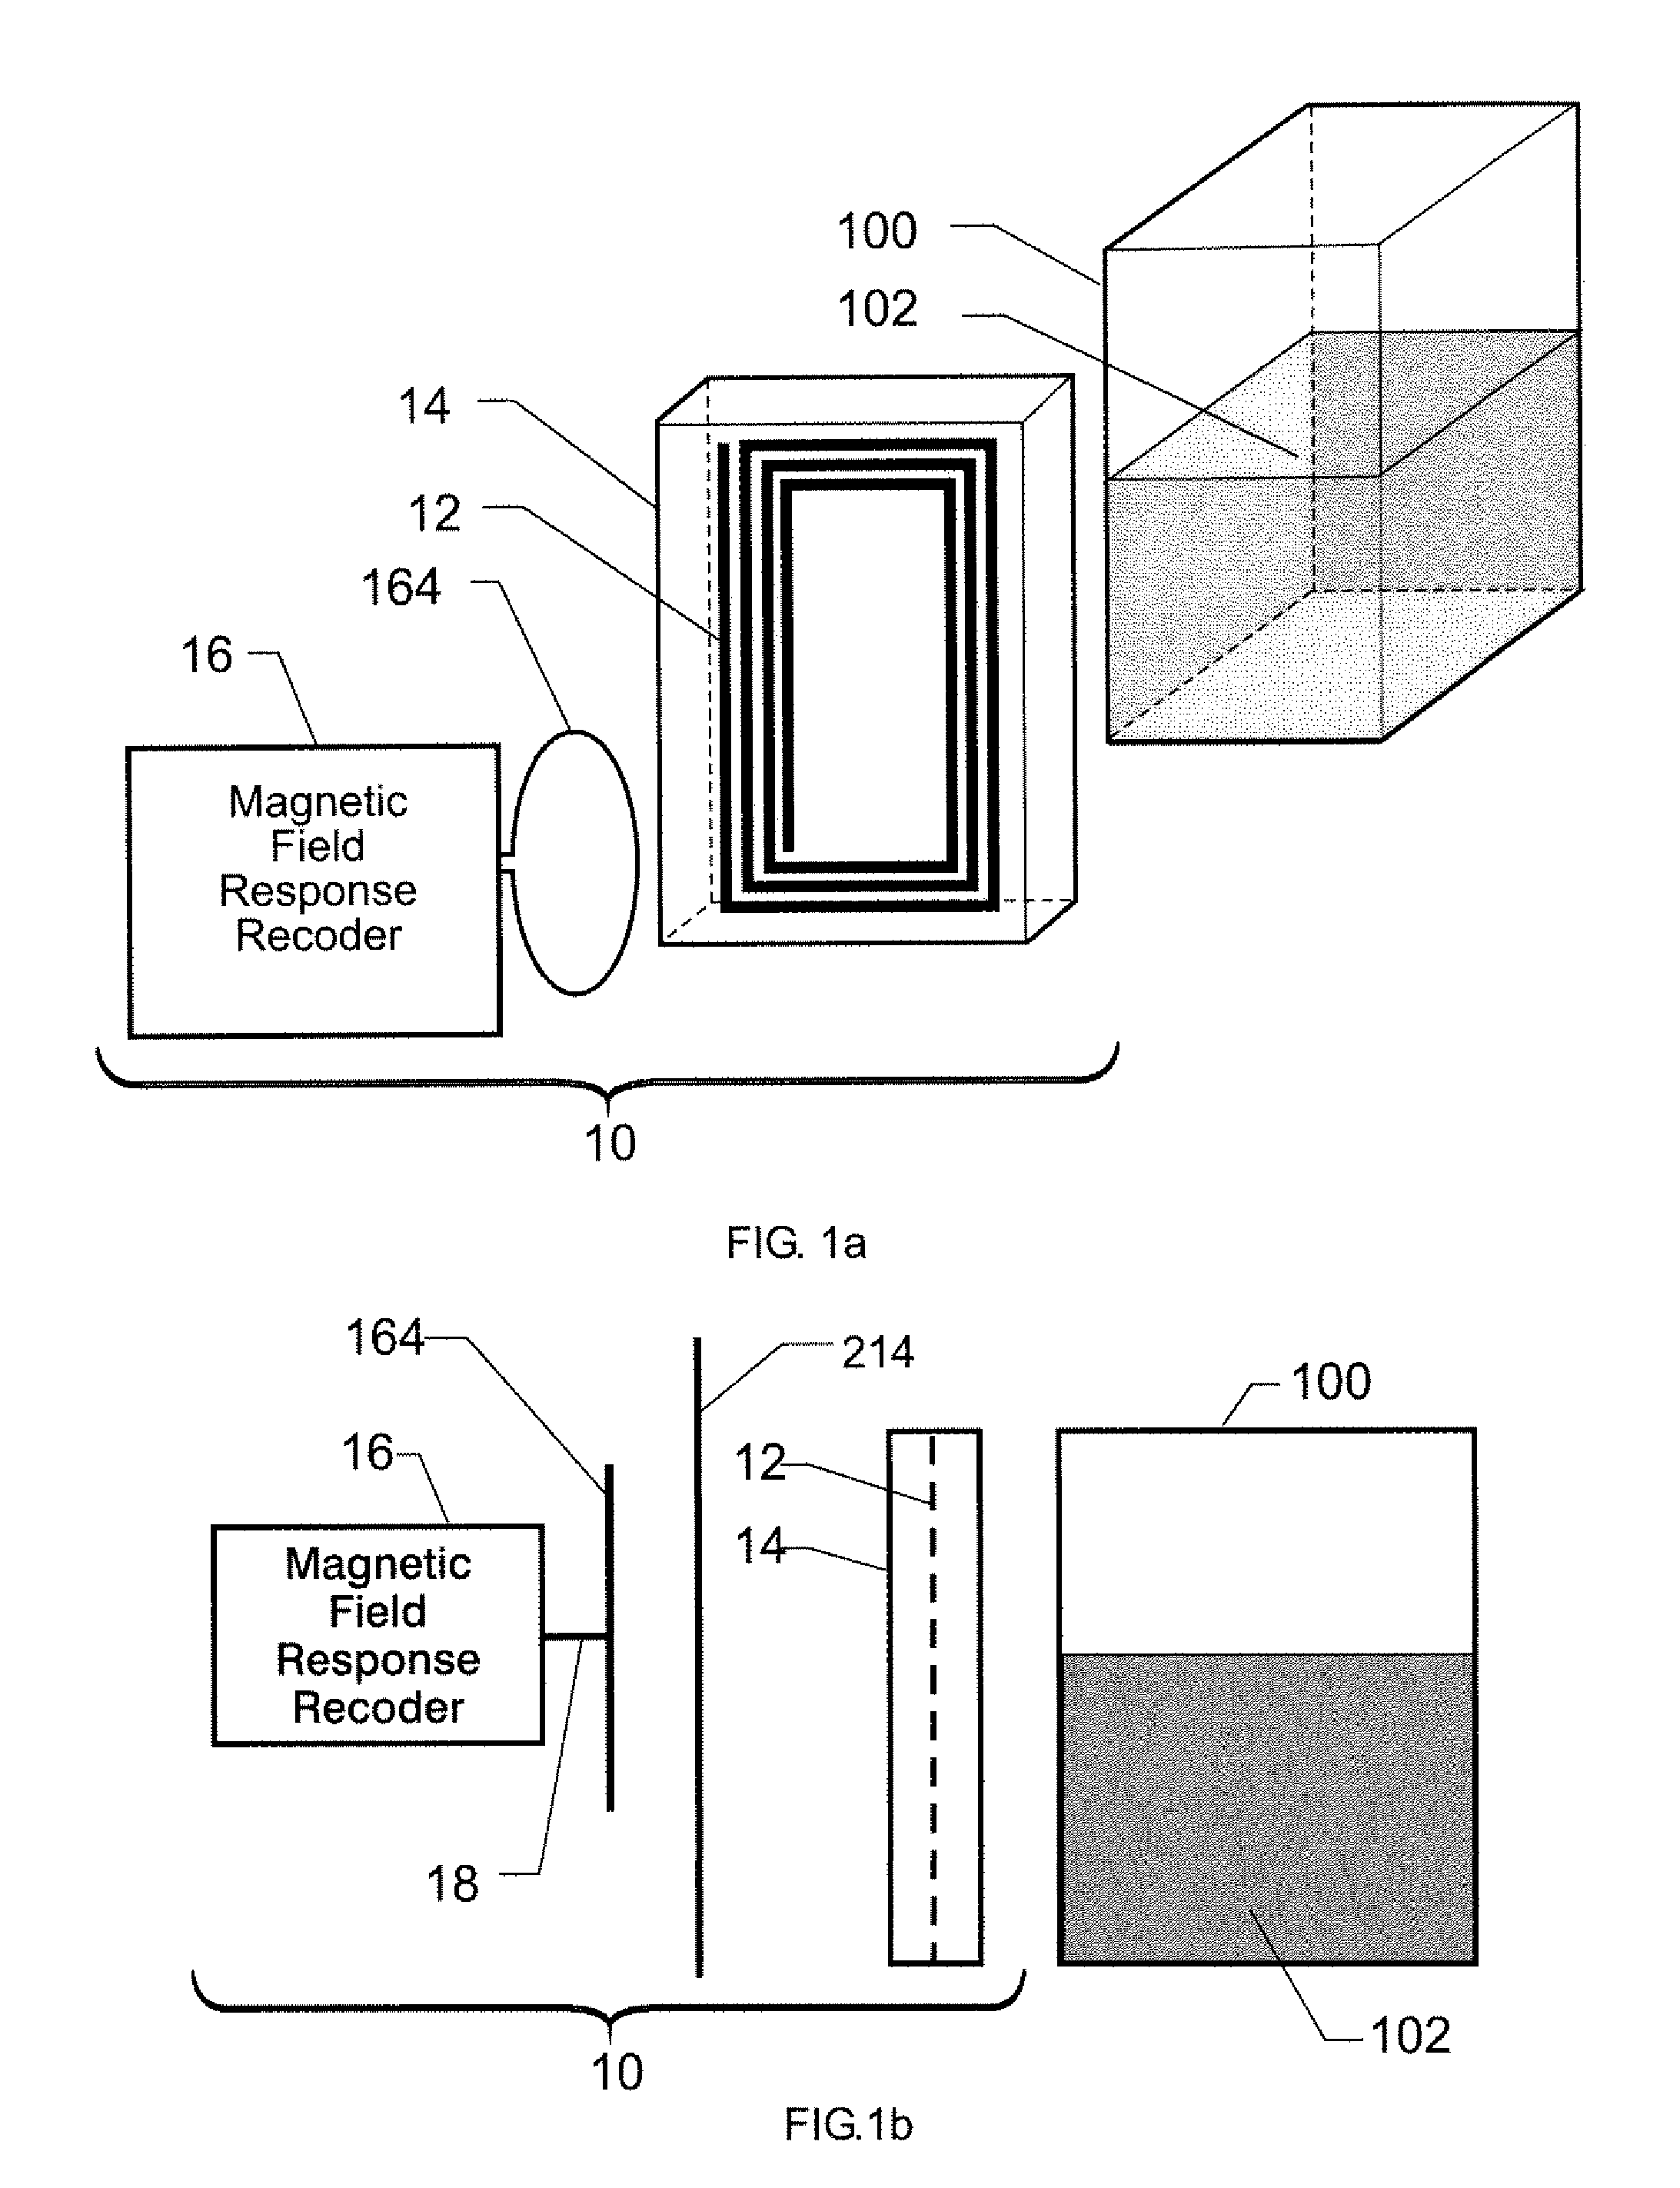 Wireless sensing system for non-invasive monitoring of attributes of contents in a container